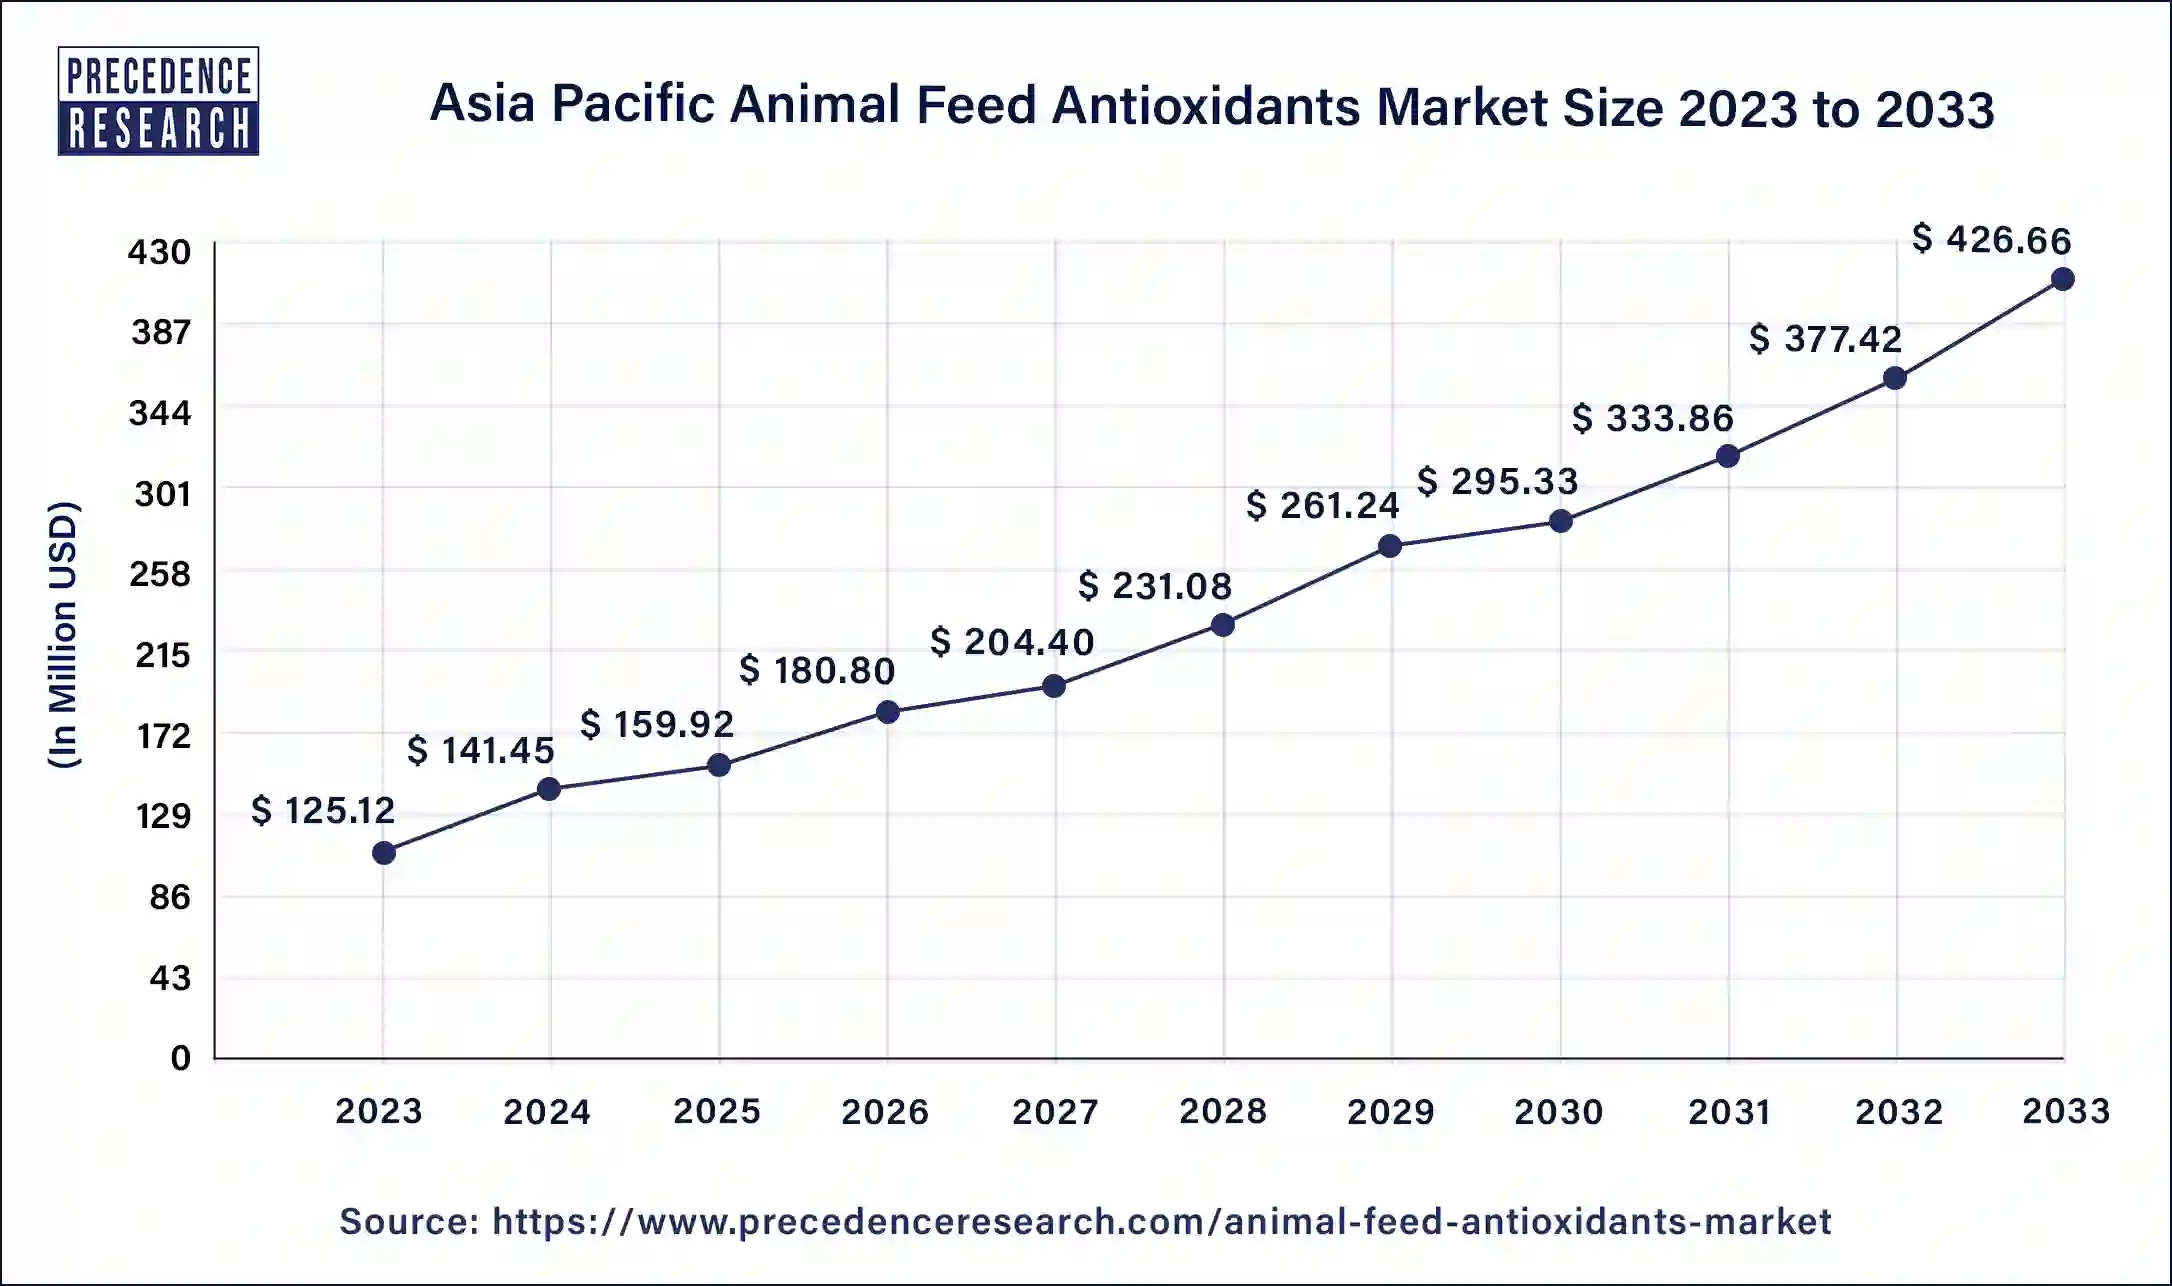 Asia Pacific Animal Feed Antioxidants Market Size 2024 to 2033